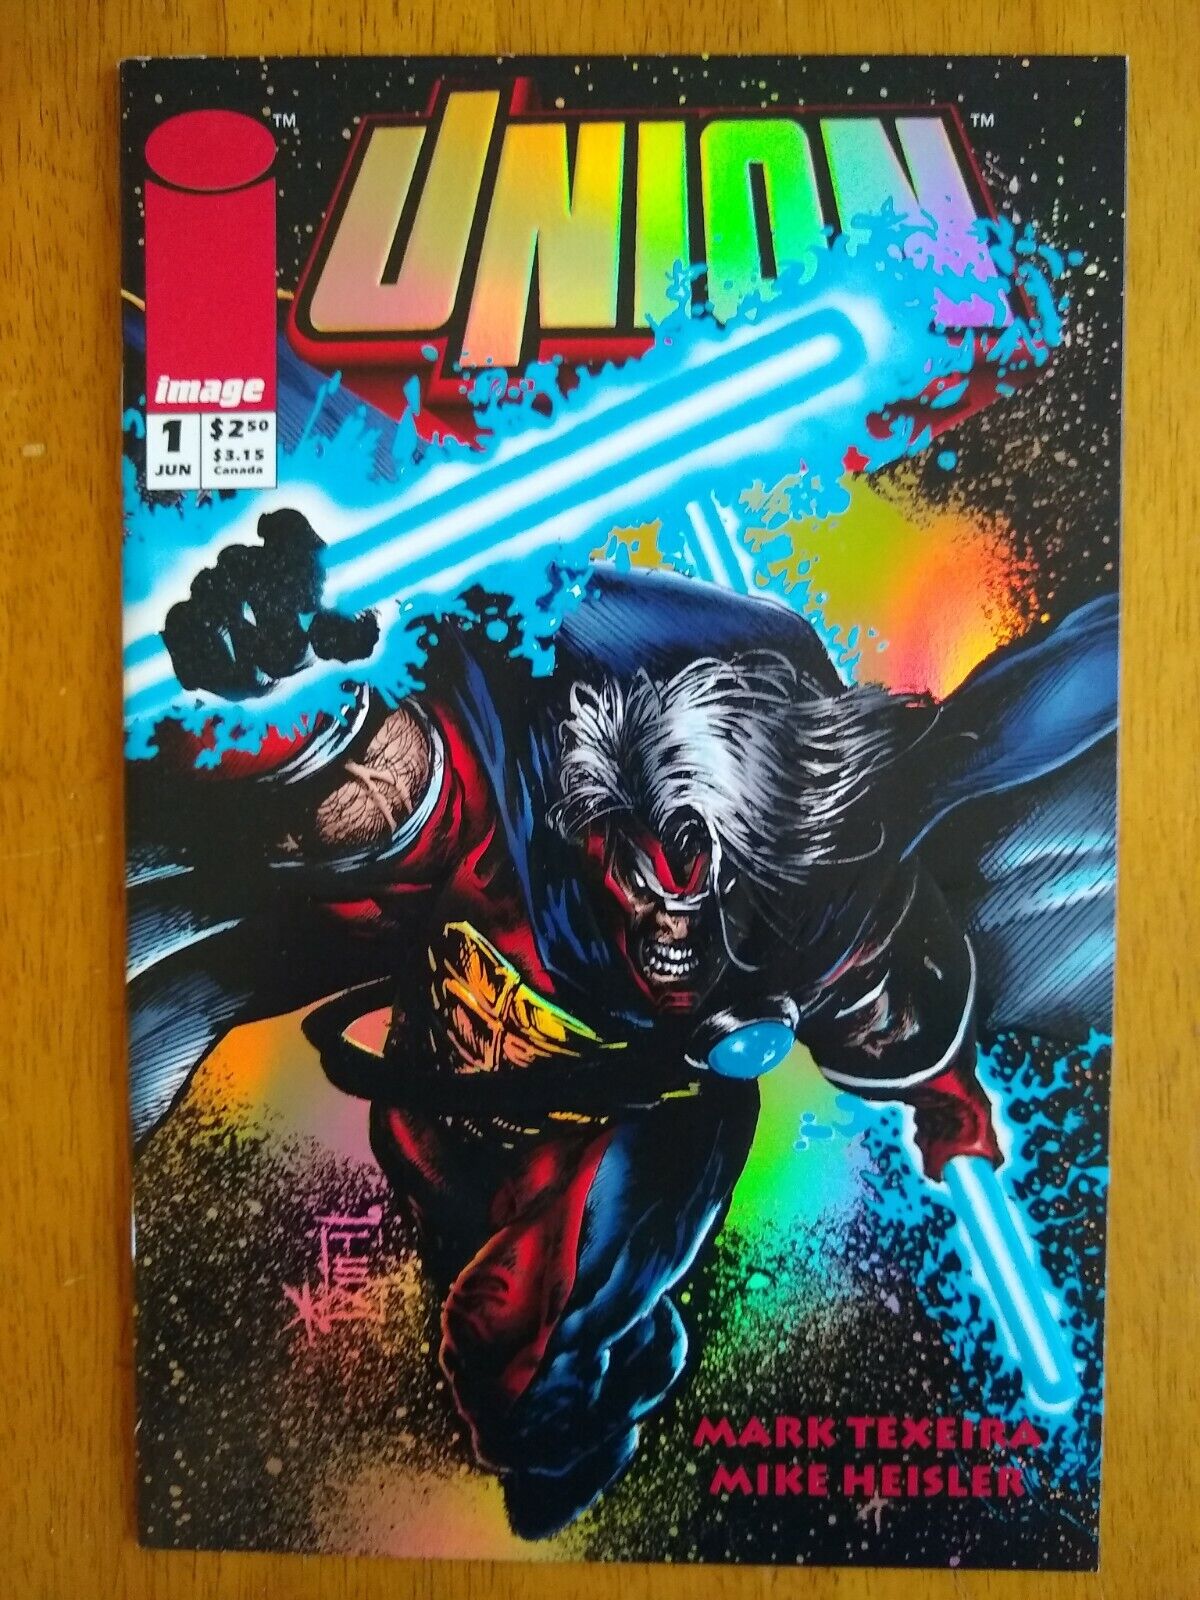 UNION #1 Holo Foil Embossed Front Cover June 1993 Image Comic Book.